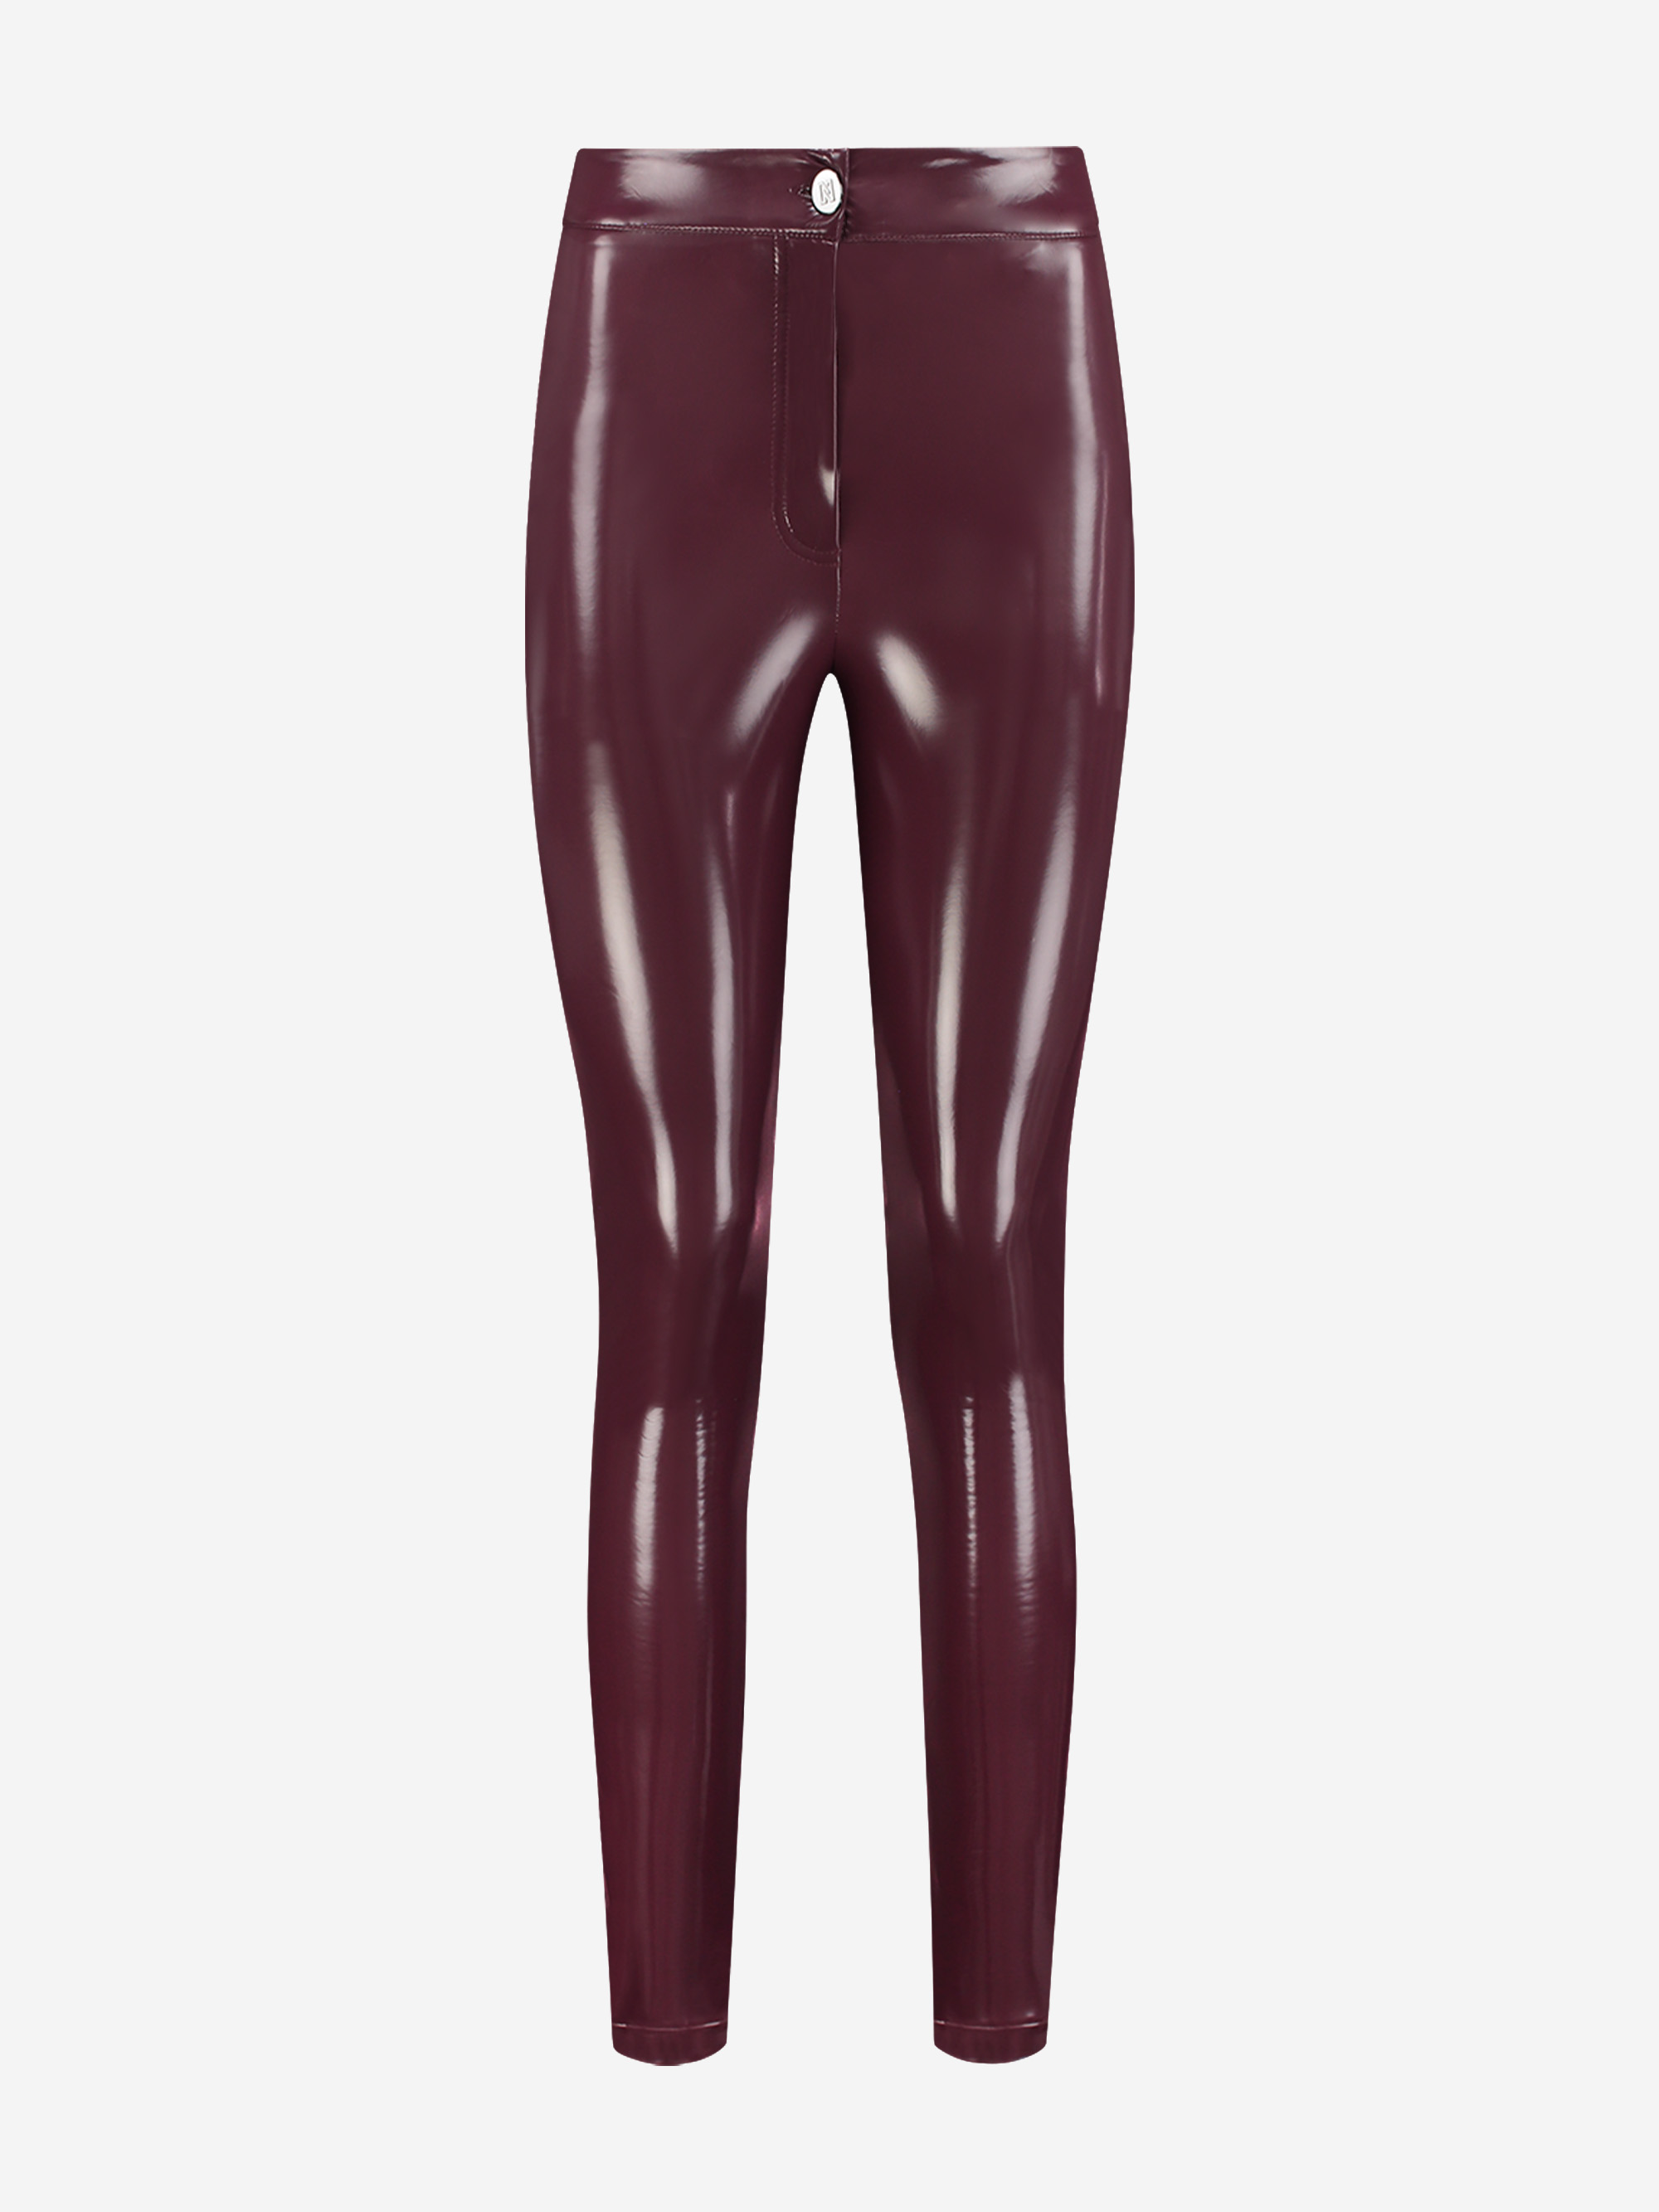 Vegan leather lacquer pants with high rise